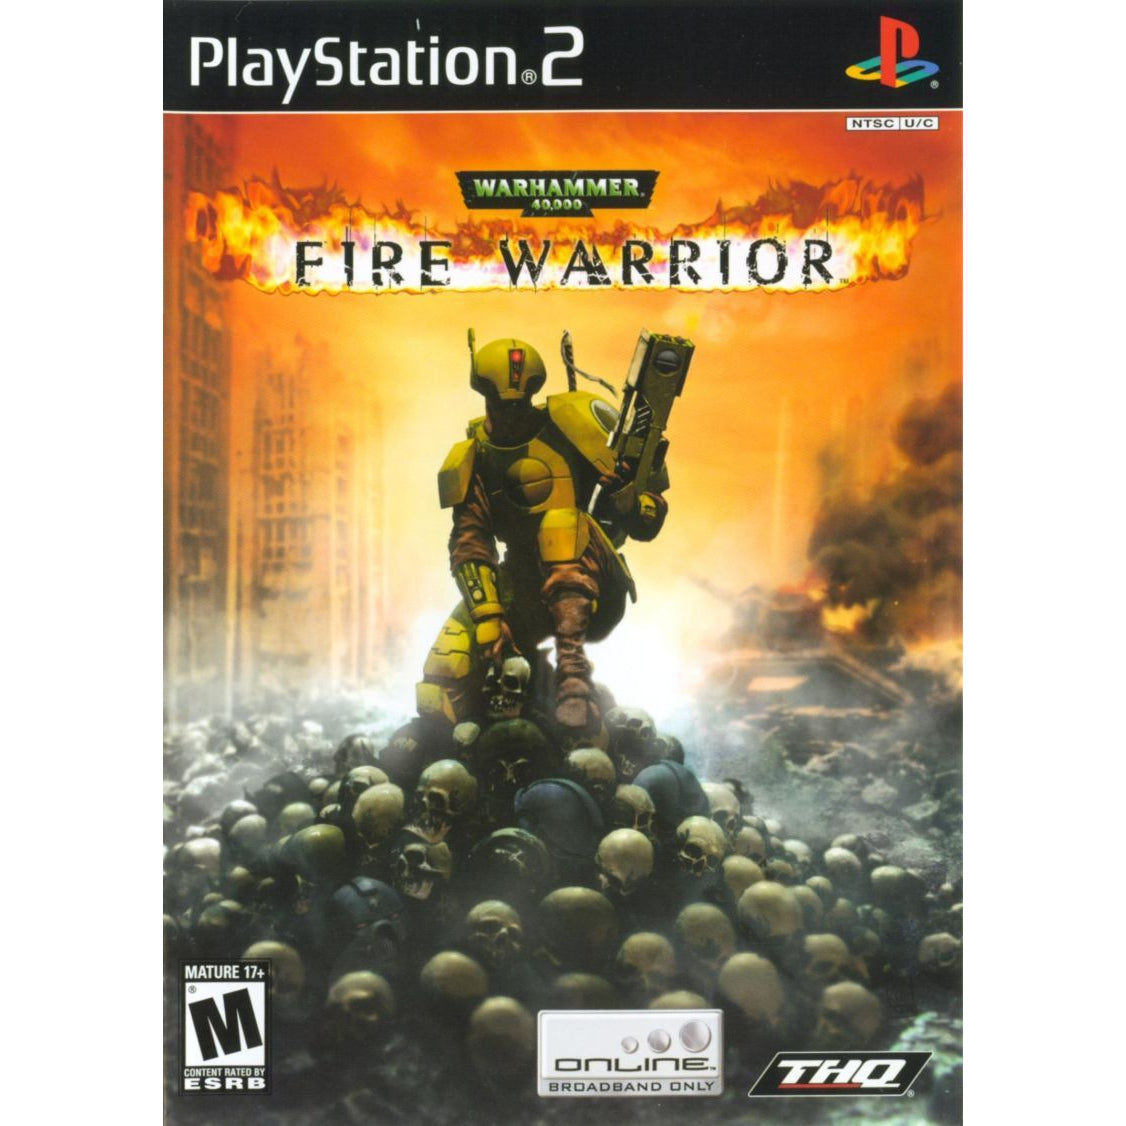 Warhammer 40,000: Fire Warrior - PlayStation 2 (PS2) Game Complete - YourGamingShop.com - Buy, Sell, Trade Video Games Online. 120 Day Warranty. Satisfaction Guaranteed.